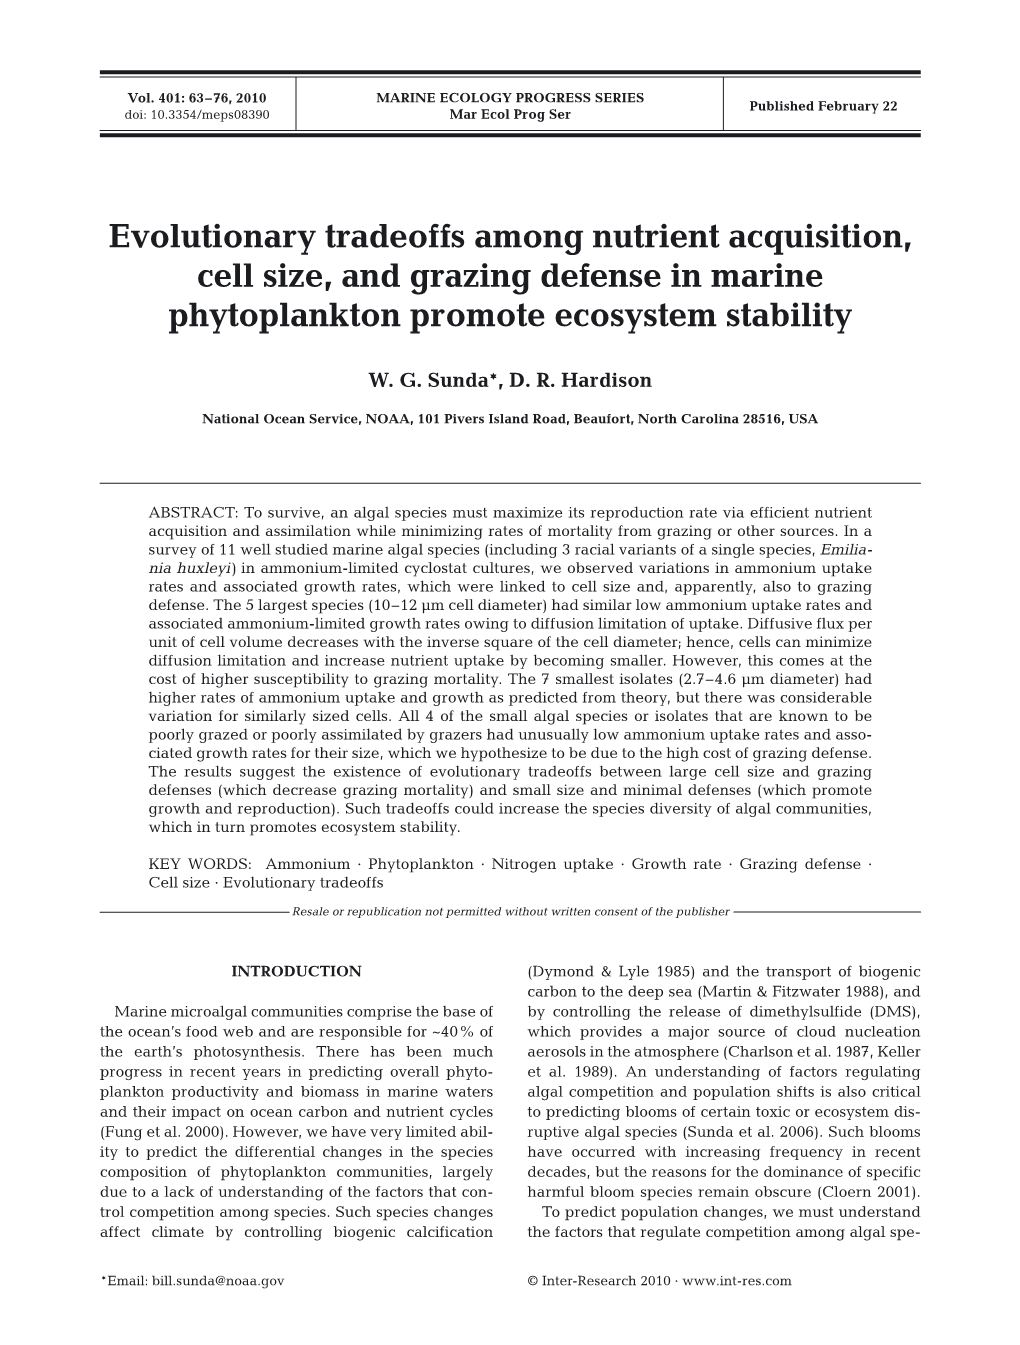 Evolutionary Tradeoffs Among Nutrient Acquisition, Cell Size, and Grazing Defense in Marine Phytoplankton Promote Ecosystem Stability